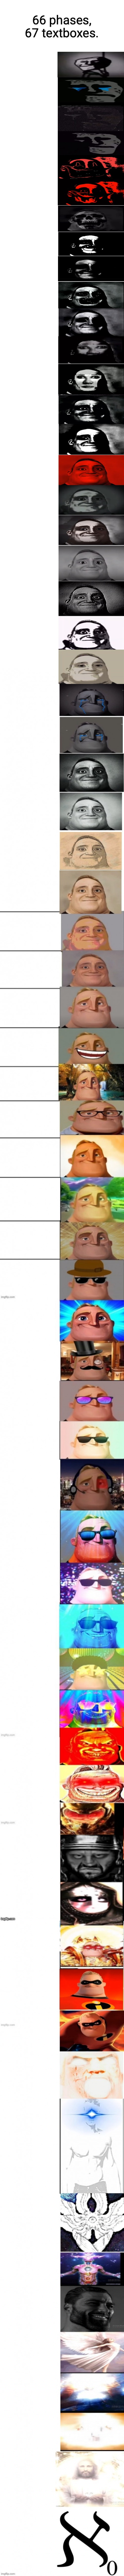 The longest mr incredible template | 66 phases, 67 textboxes. | image tagged in mr incredible becoming canny sapphire-extended | made w/ Imgflip meme maker